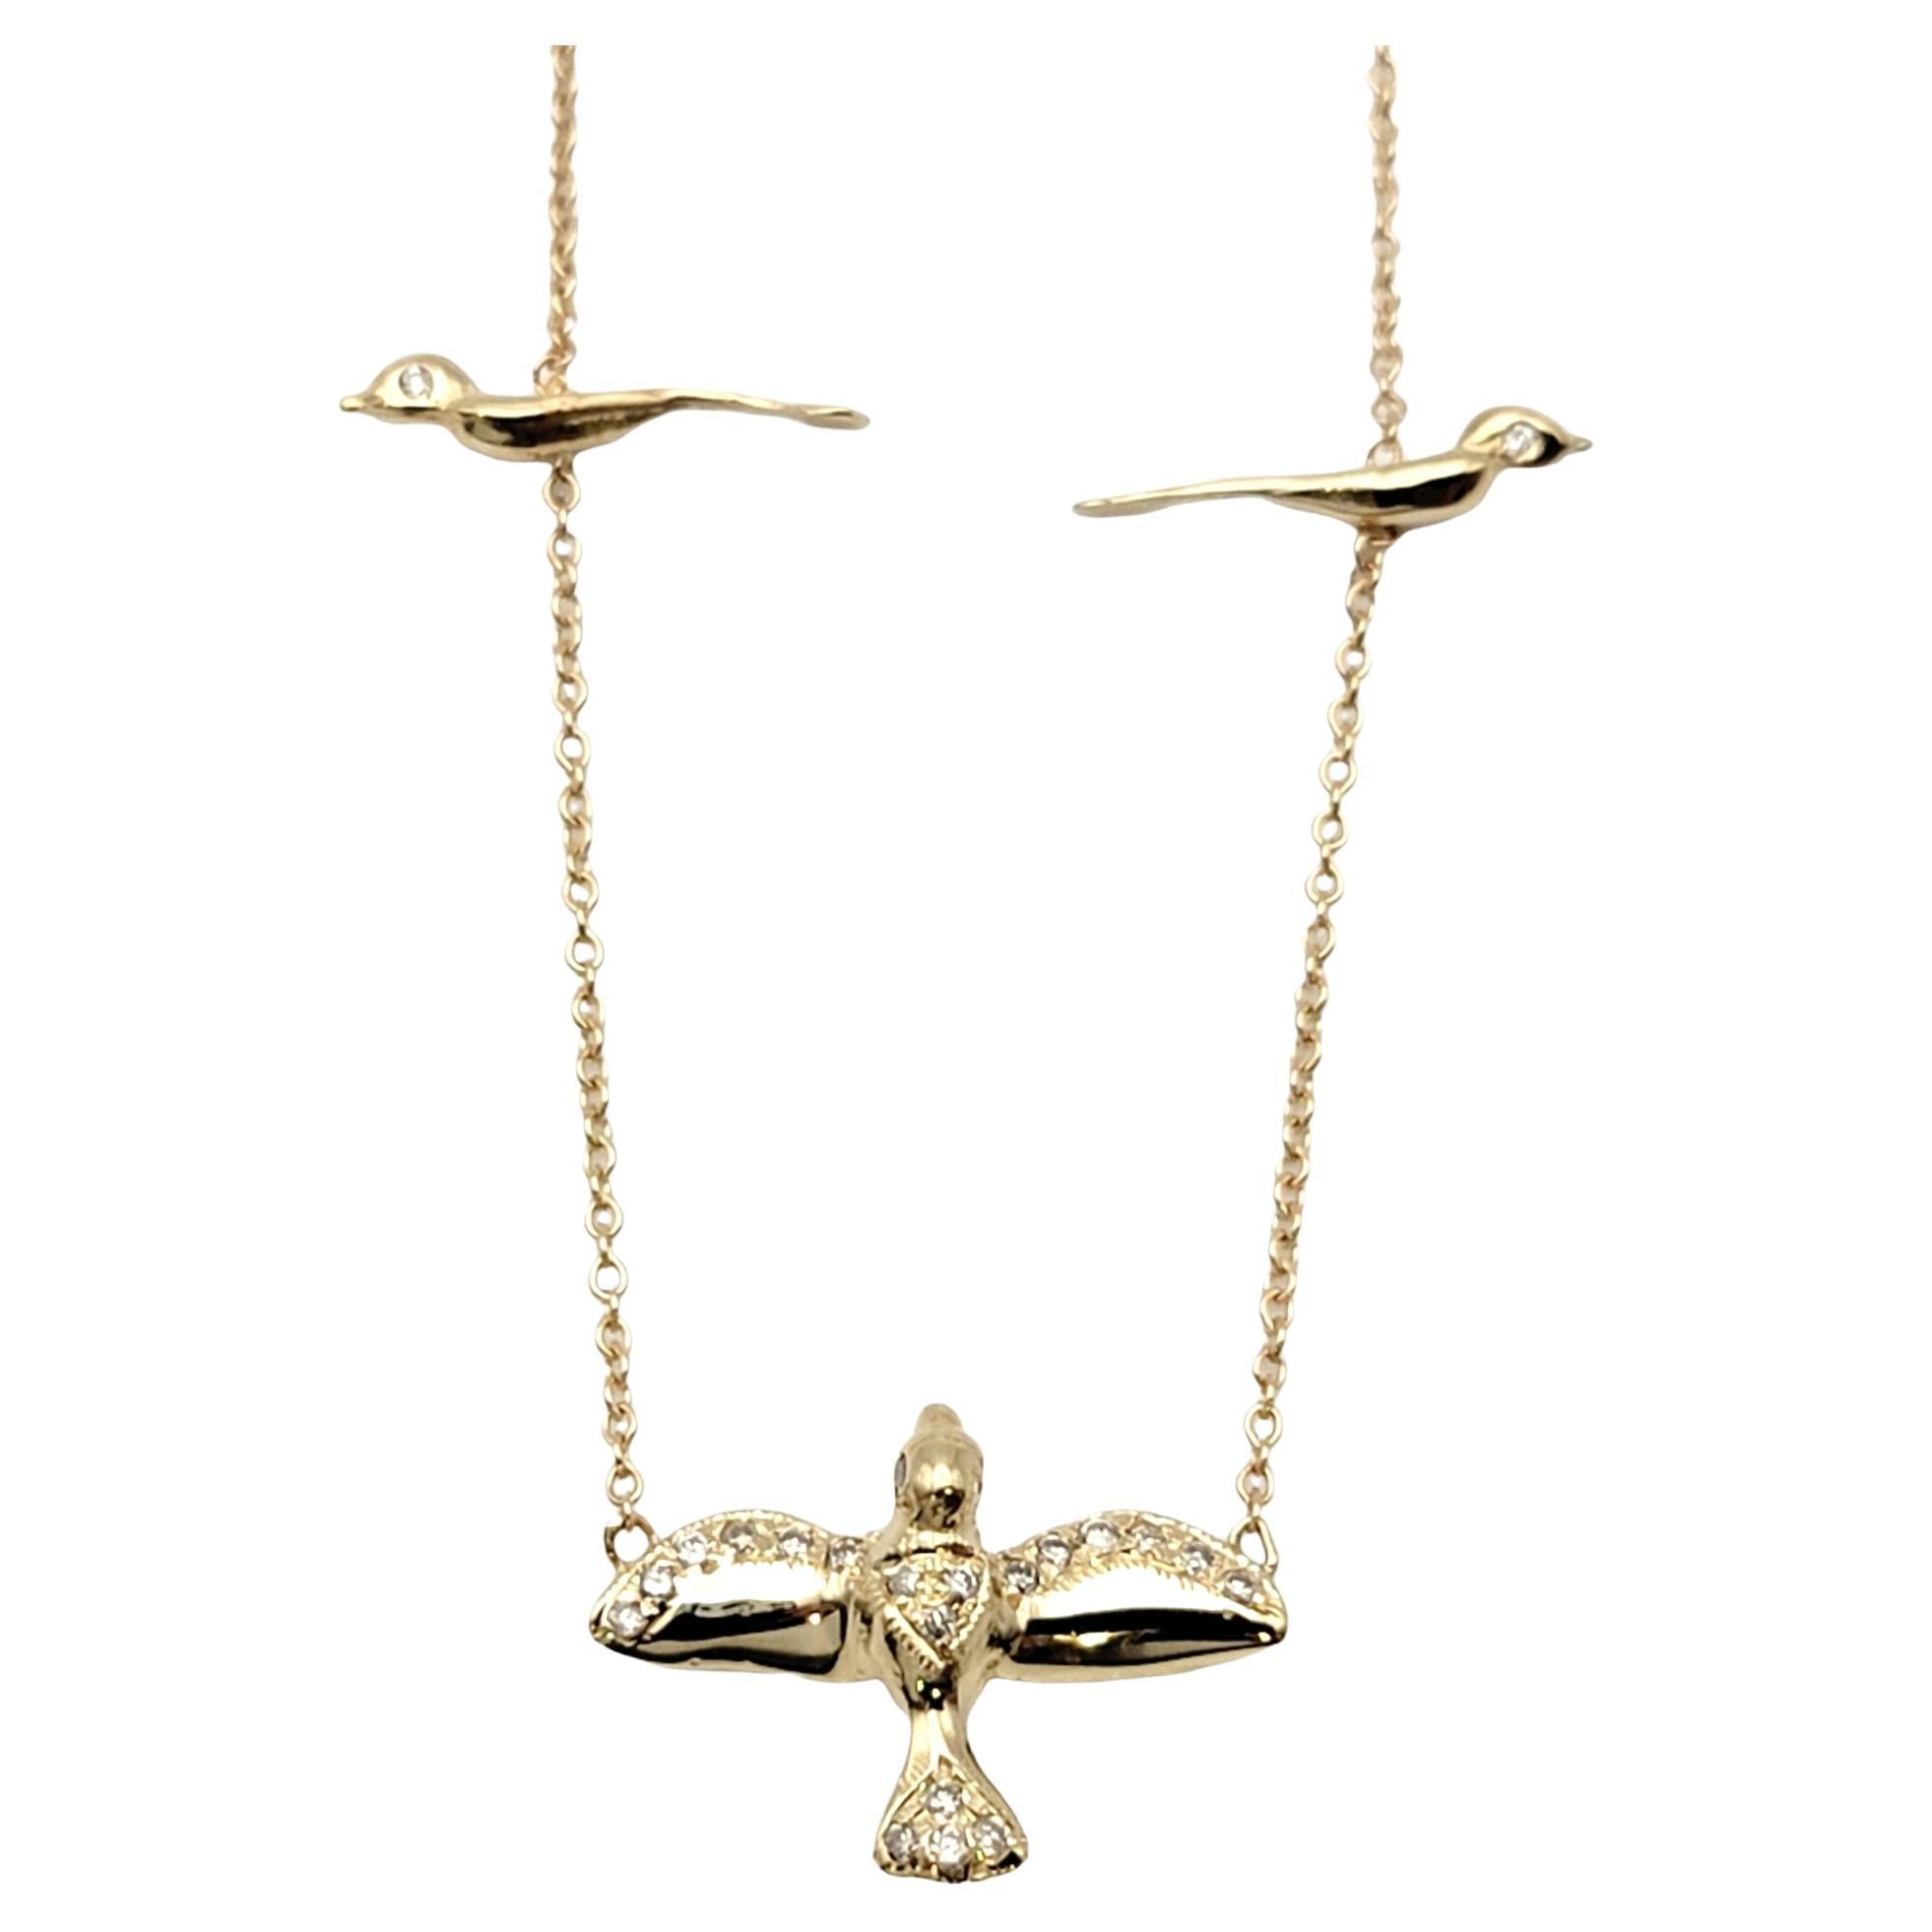 Jacquie Aiche 3 Birds Pave Diamond Station Necklace in 14 Karat Yellow Gold